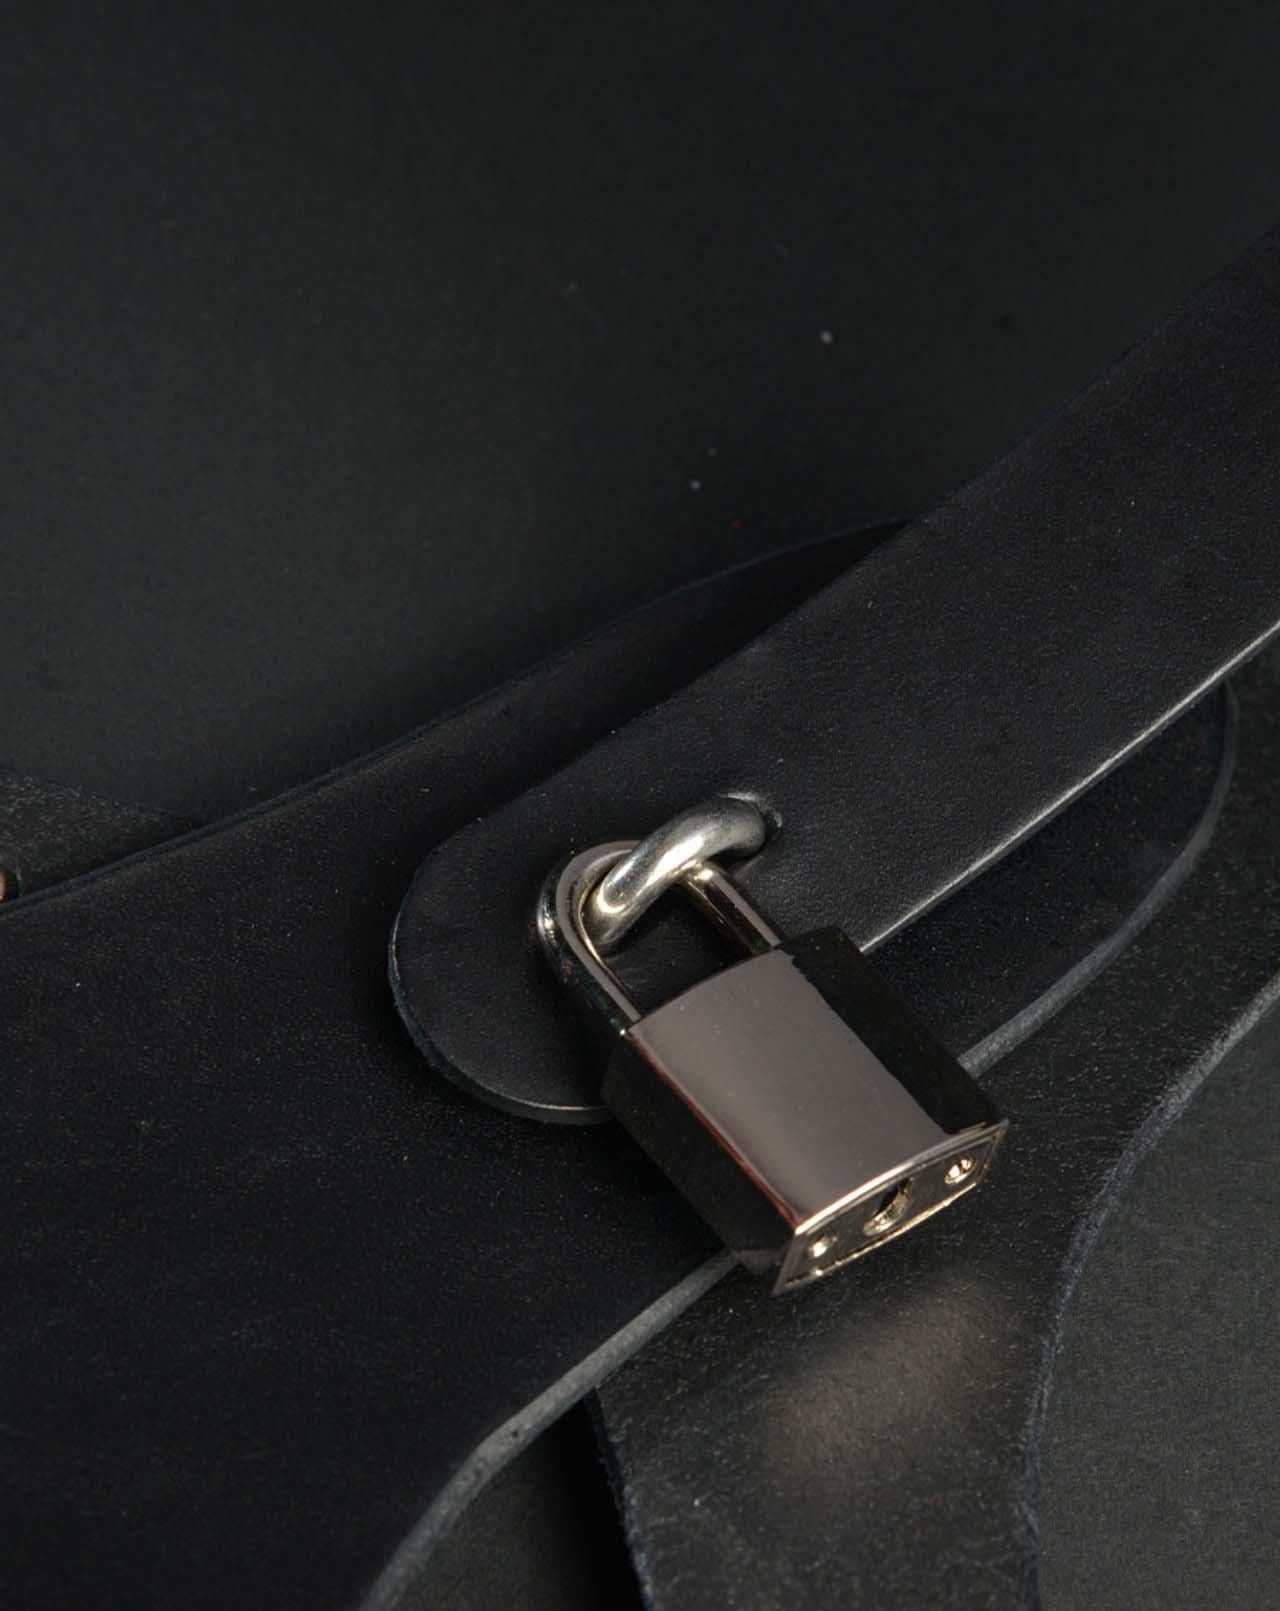 A close up of one of the locking mechanisms with lock on the Adjustable Leather Vaginal Chastity Belt.